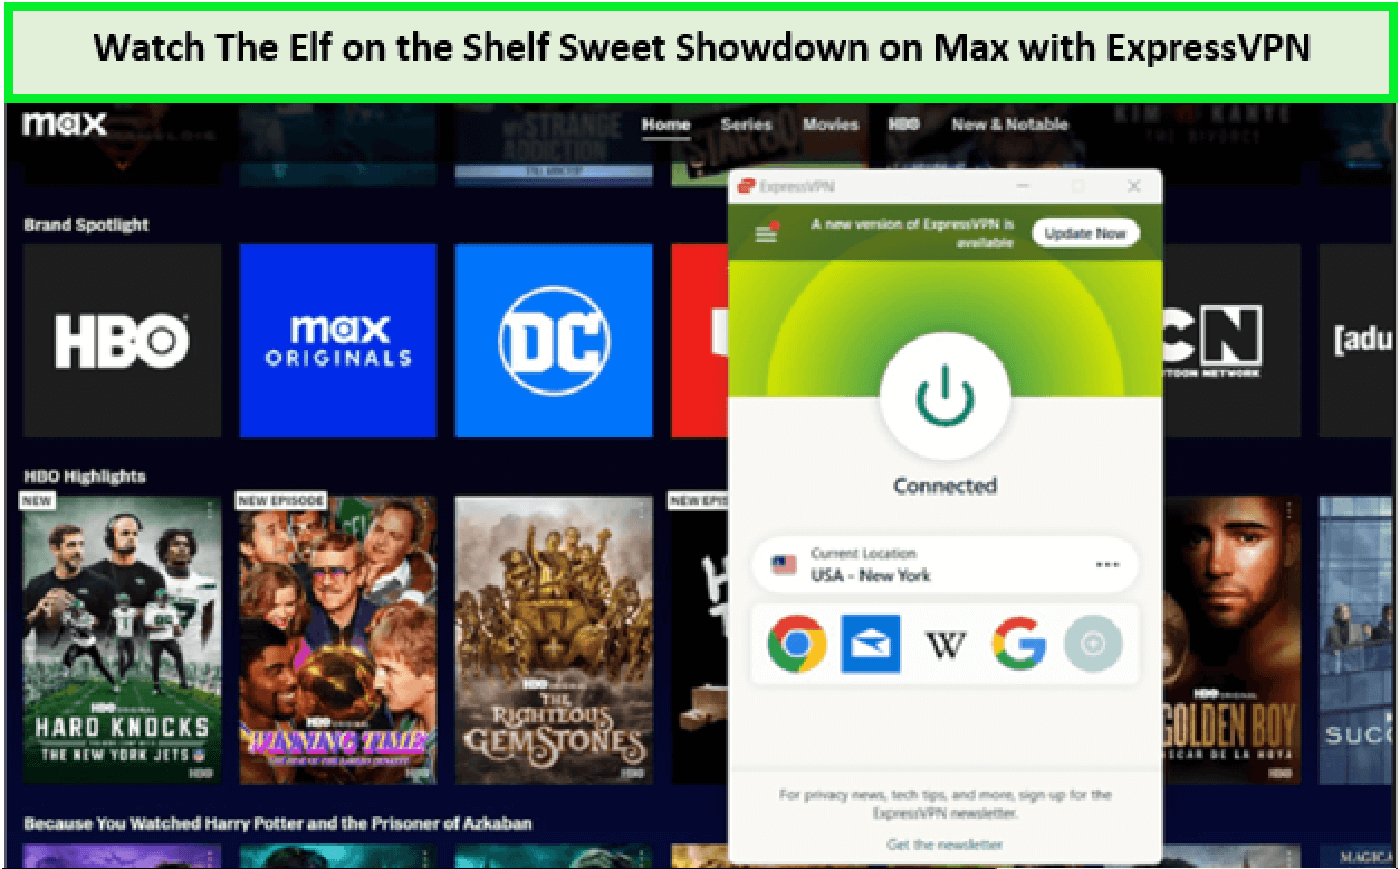 Watch-The-Elf-on-the-Shelf-Sweet-Showdown-in-Japan-on-Max-with-ExpressVPN